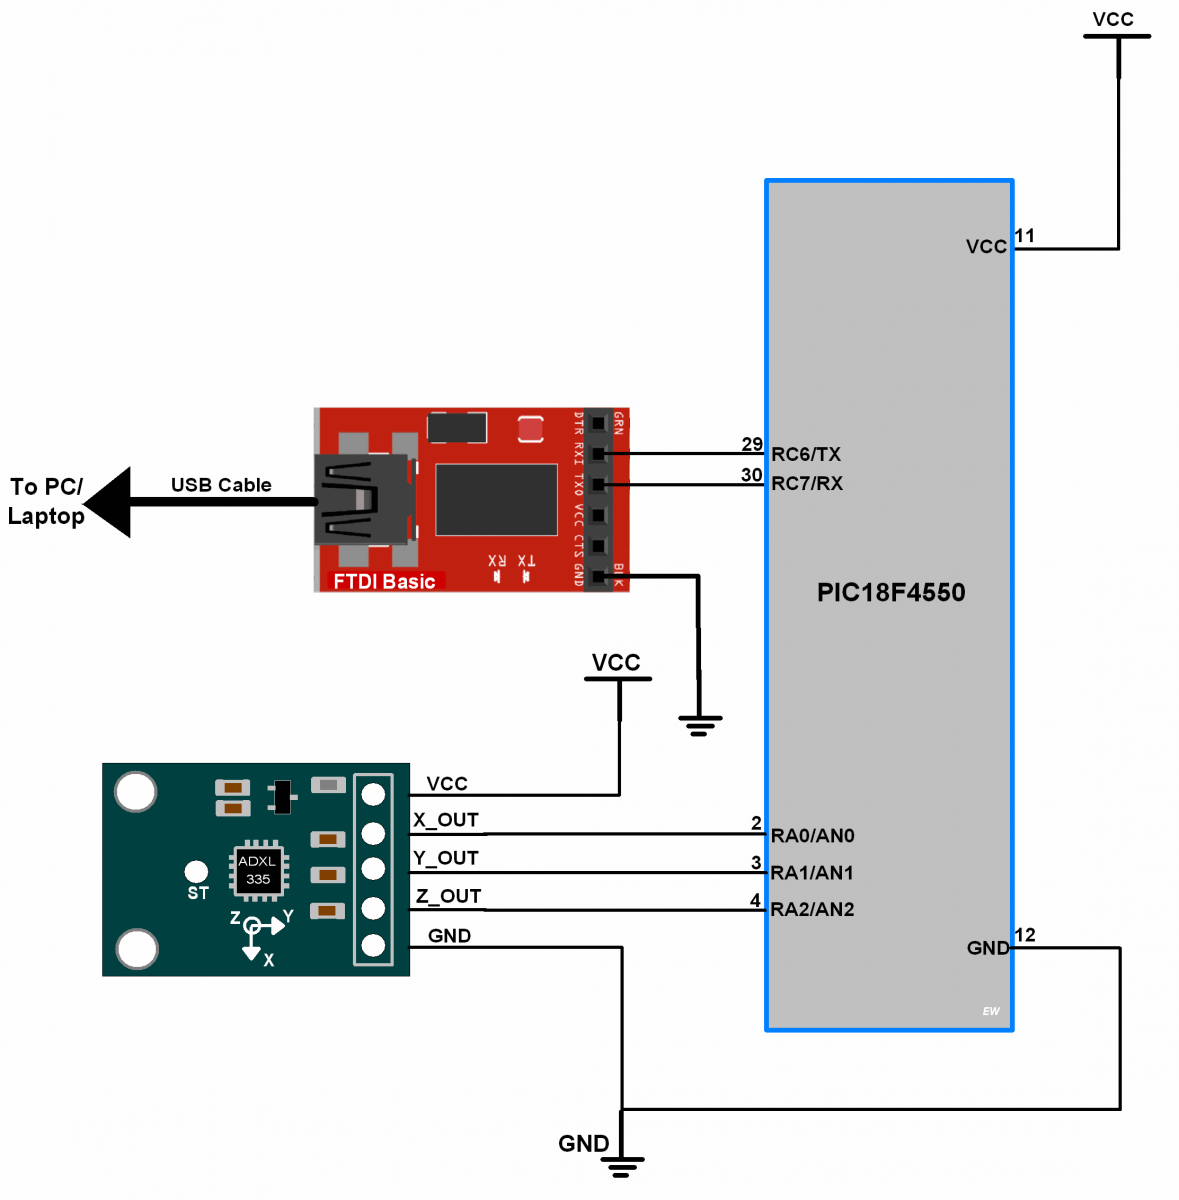 PIC18F4550 Interface with ADXL335 Accelerometer